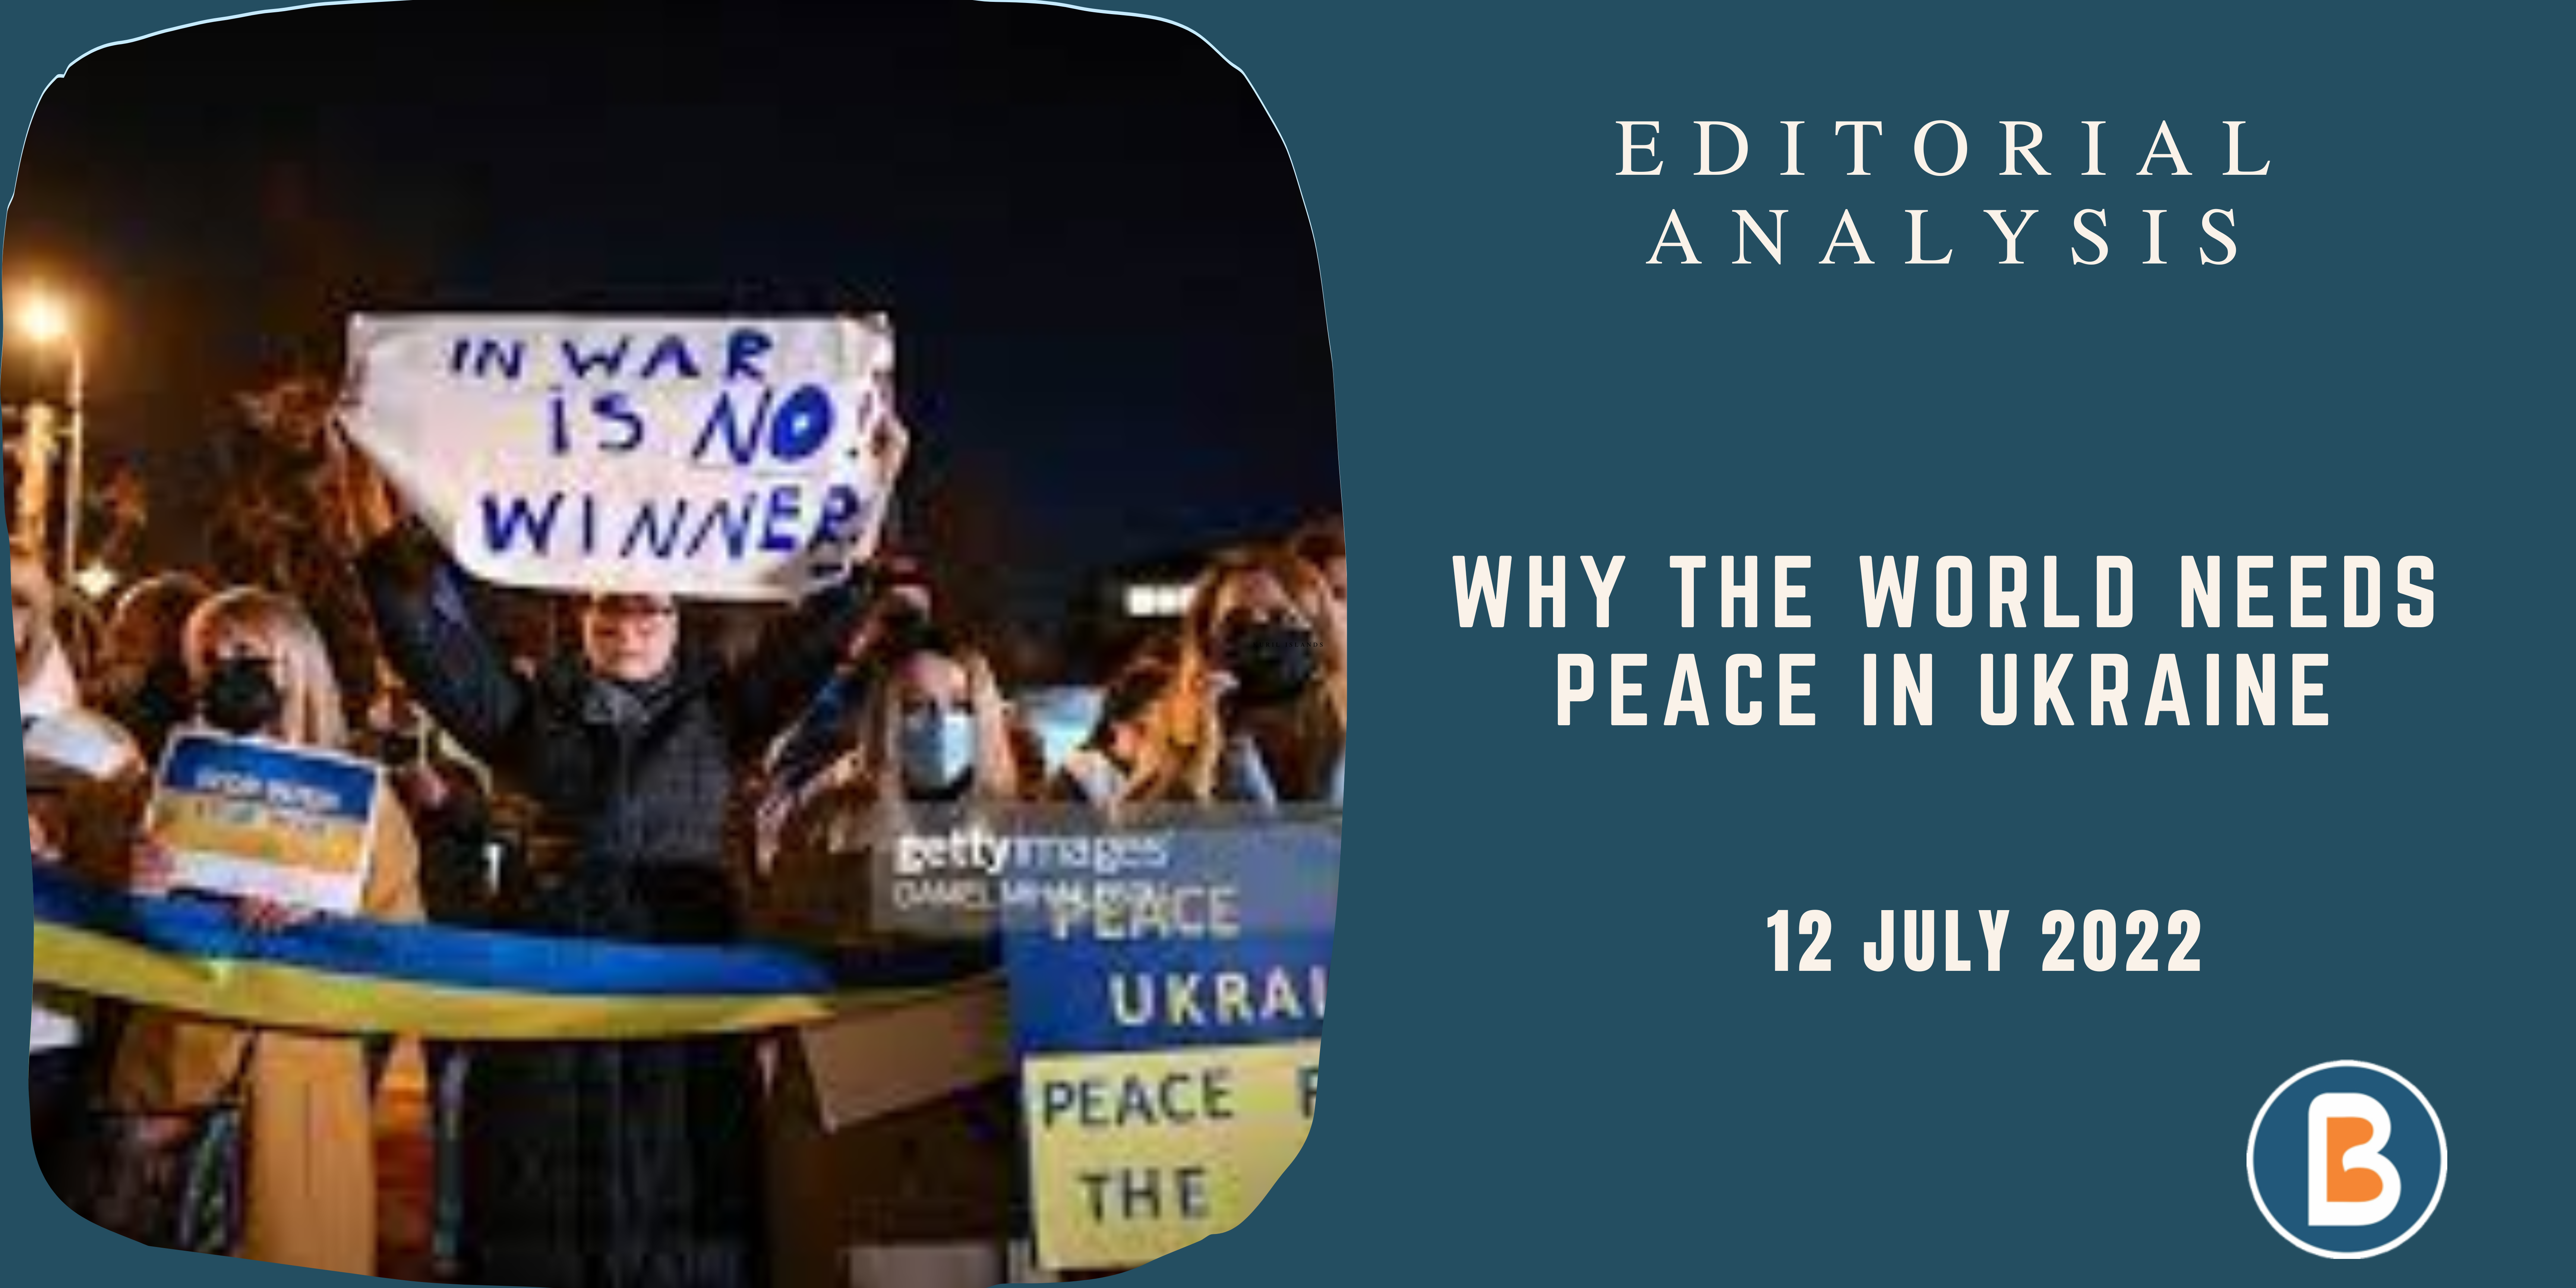 Editorial Analysis for IAS - Why the World Needs Peace in Ukraine